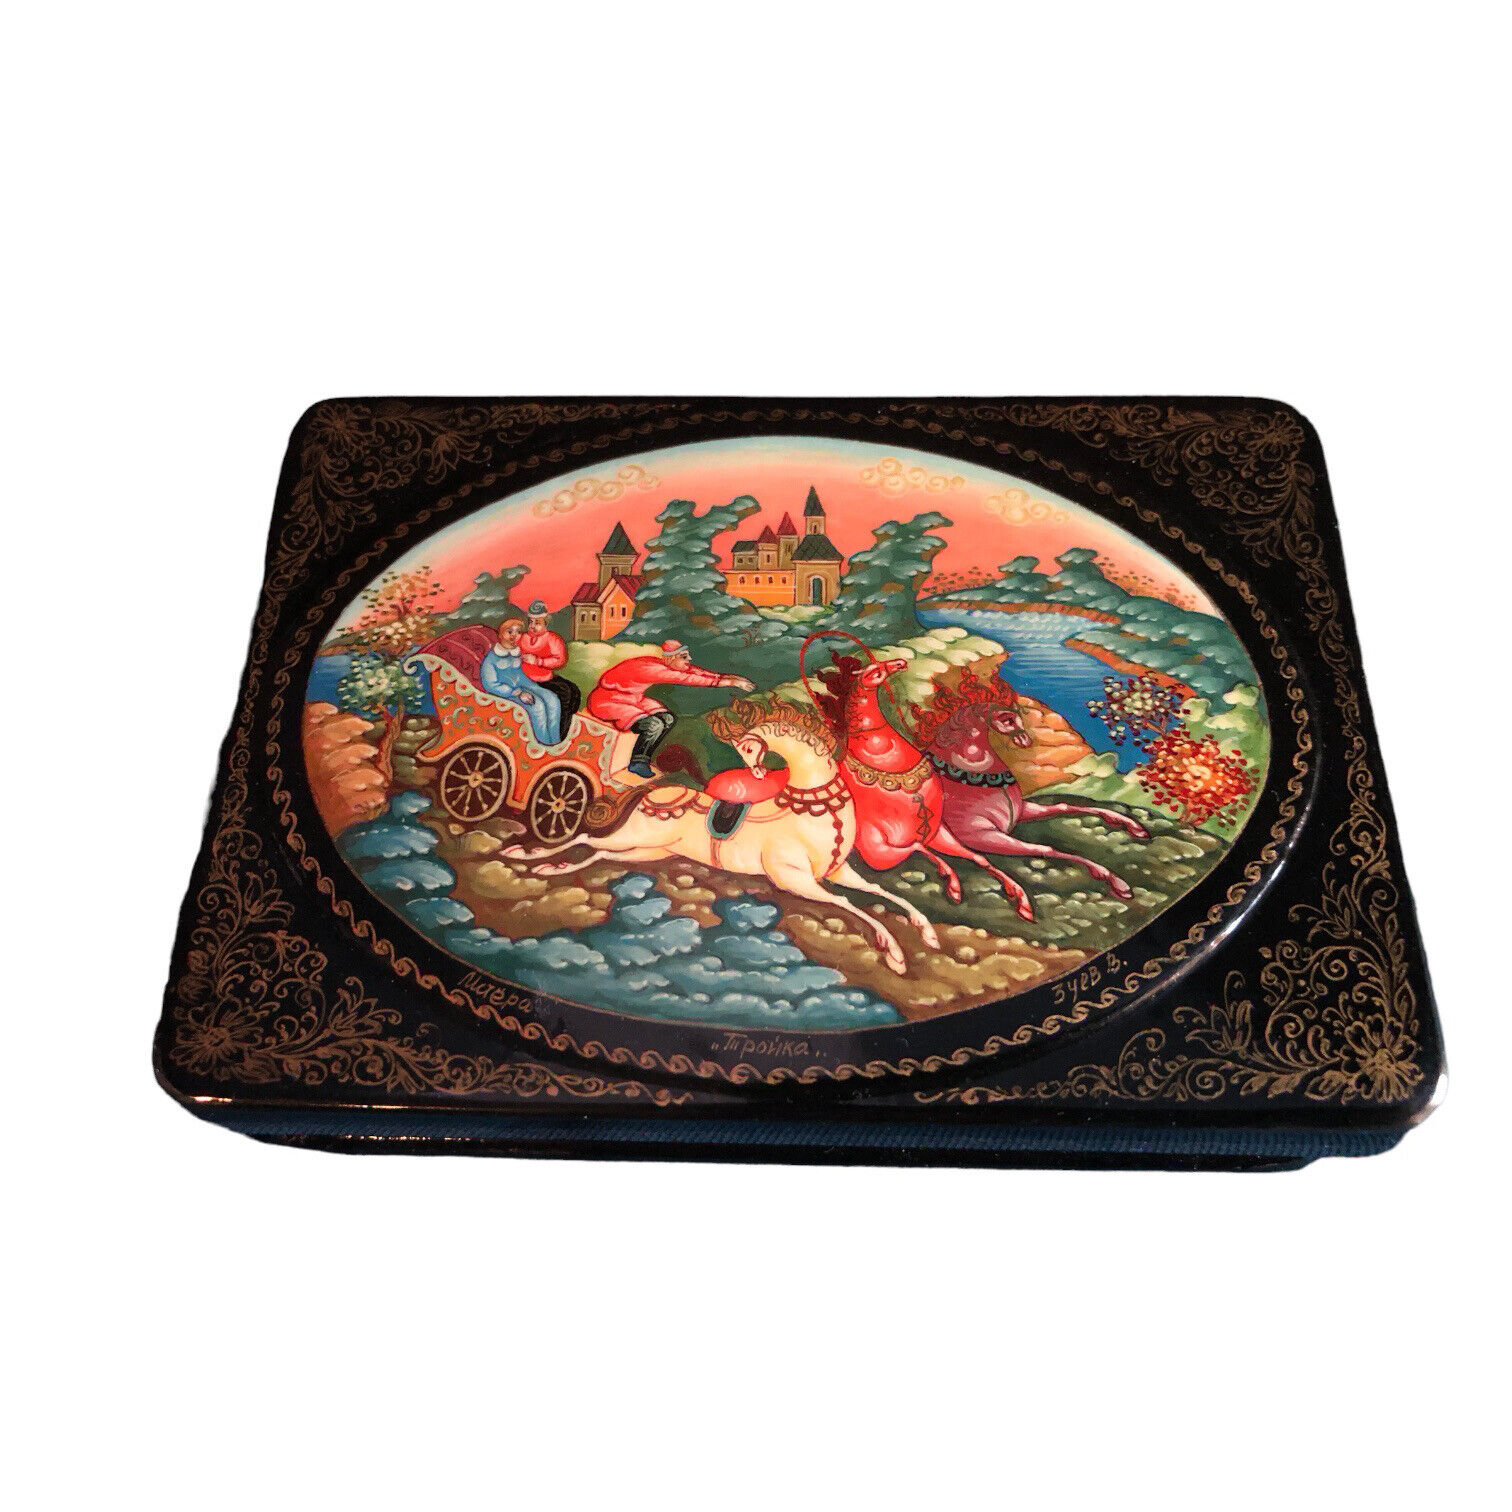 Russian Lacquer Trinket Box Hand Painted Folk Art Horse Carriage Scene